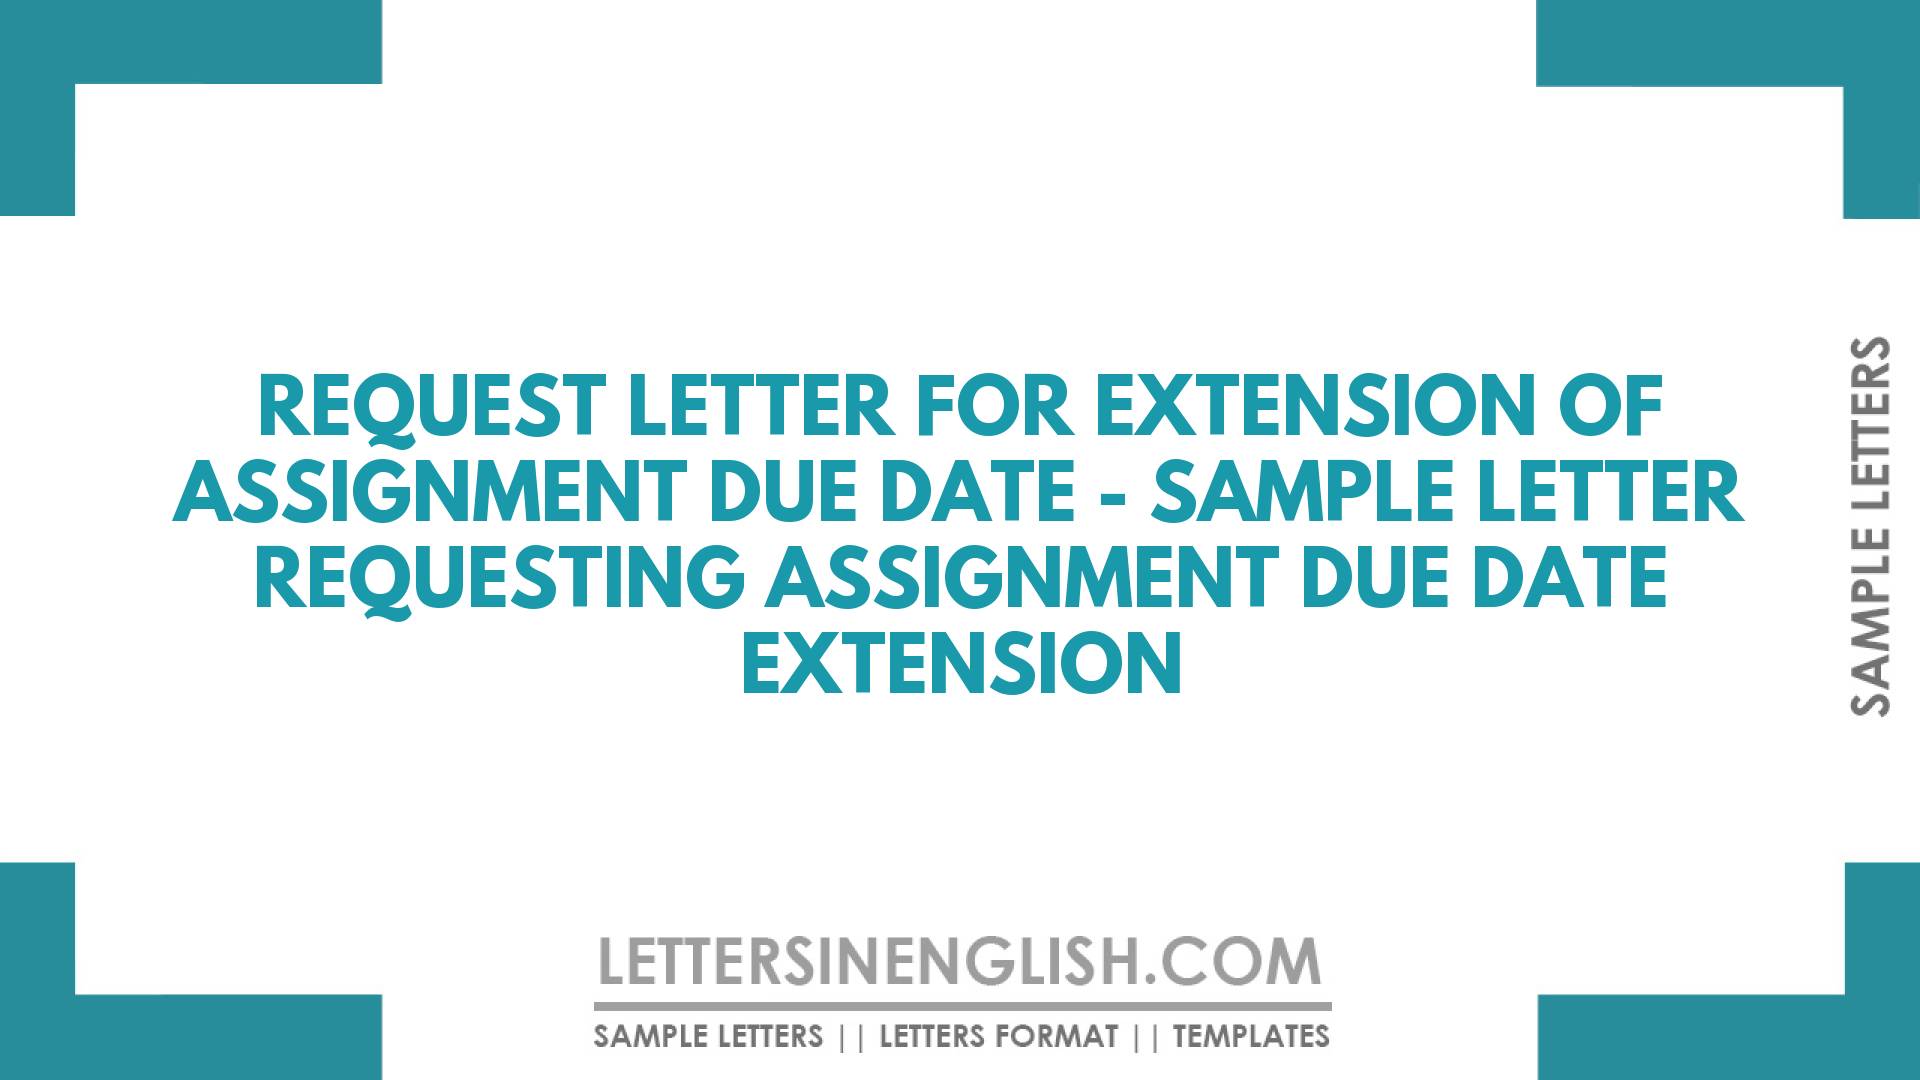 Request Letter For Extension Of Assignment Due Date Sample Letter